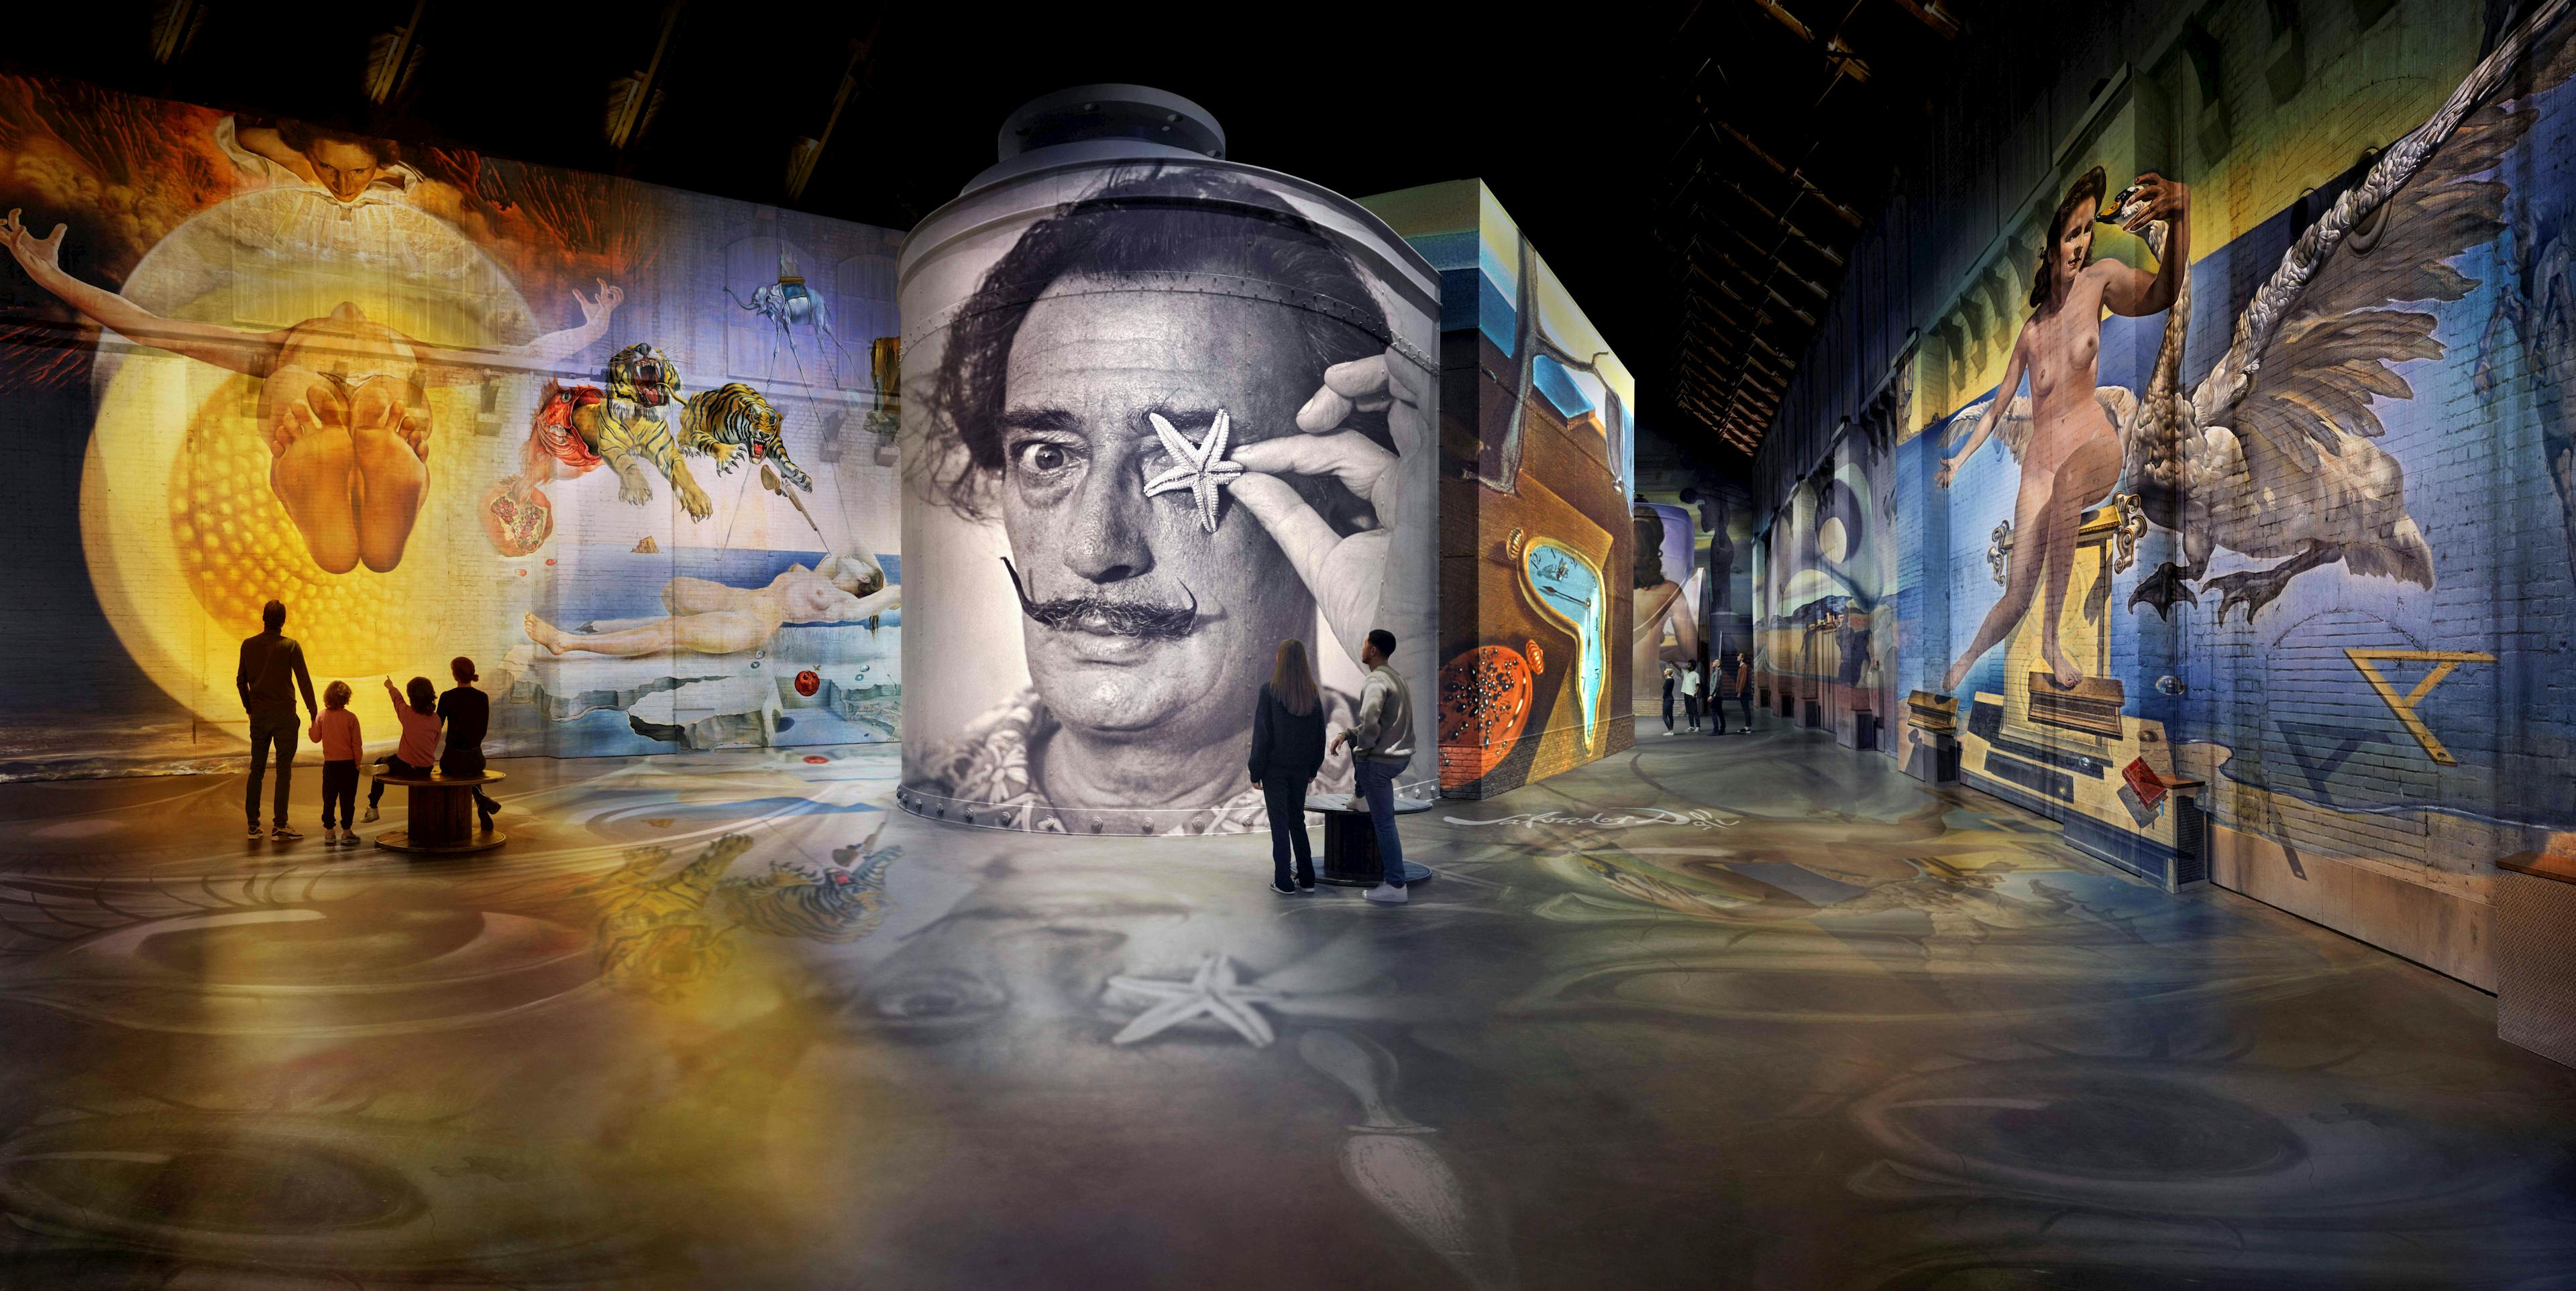 Dalí, The Endless Enigma